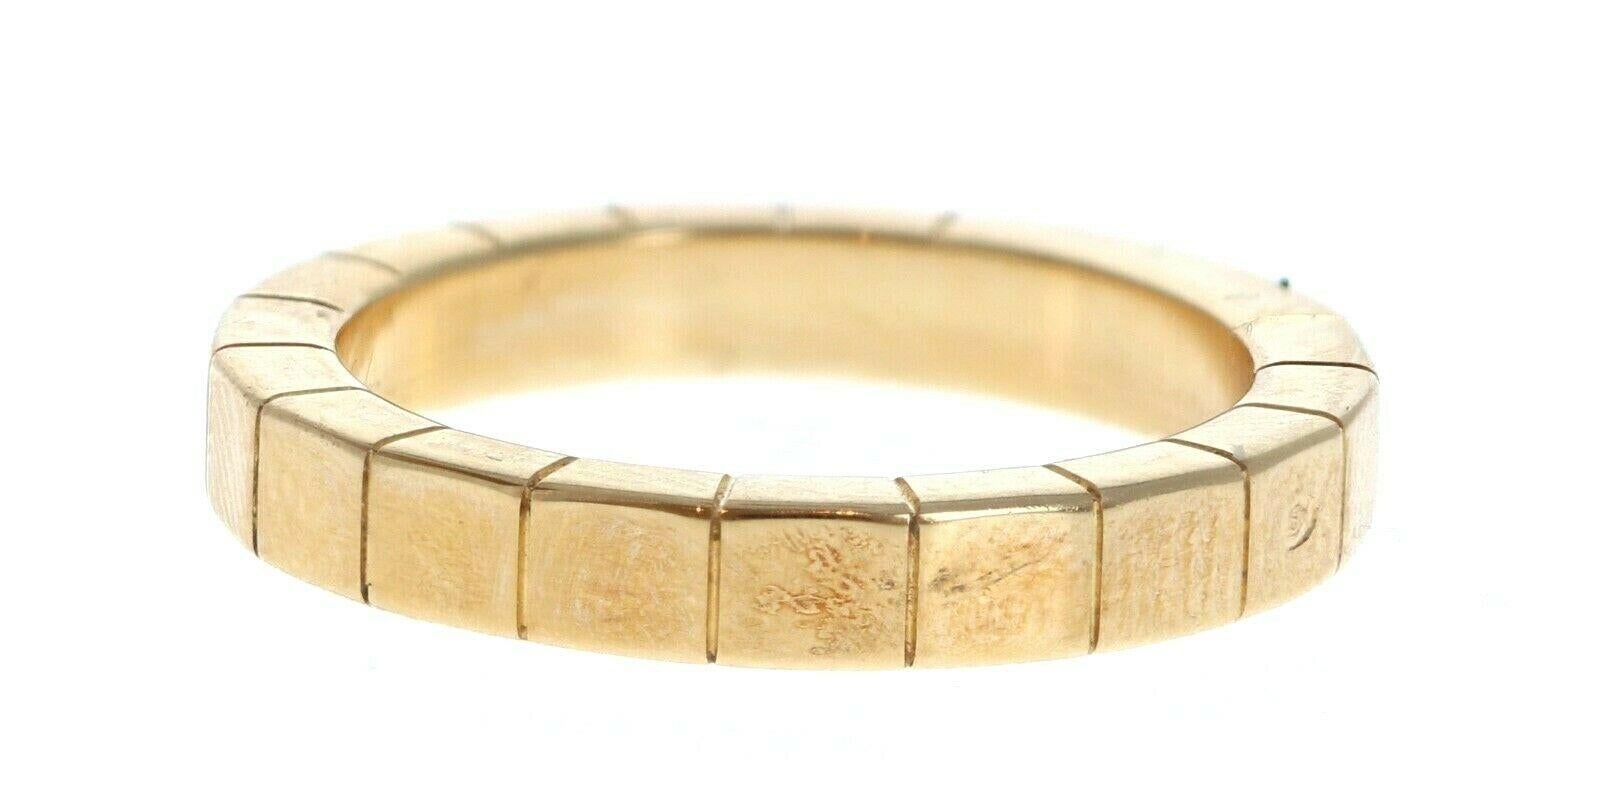 Cartier 18k Yellow Gold Lanières Band 5.4g Size 48

For sale is a cartier Lanieres ring 
The ring is a size 48 US size 4.5
 Perfect worn day or night.
 Get this stunning ring now!



Metal: 18k yellow gold
     
Hallmark: 750 48 'serial #'

Size: eu